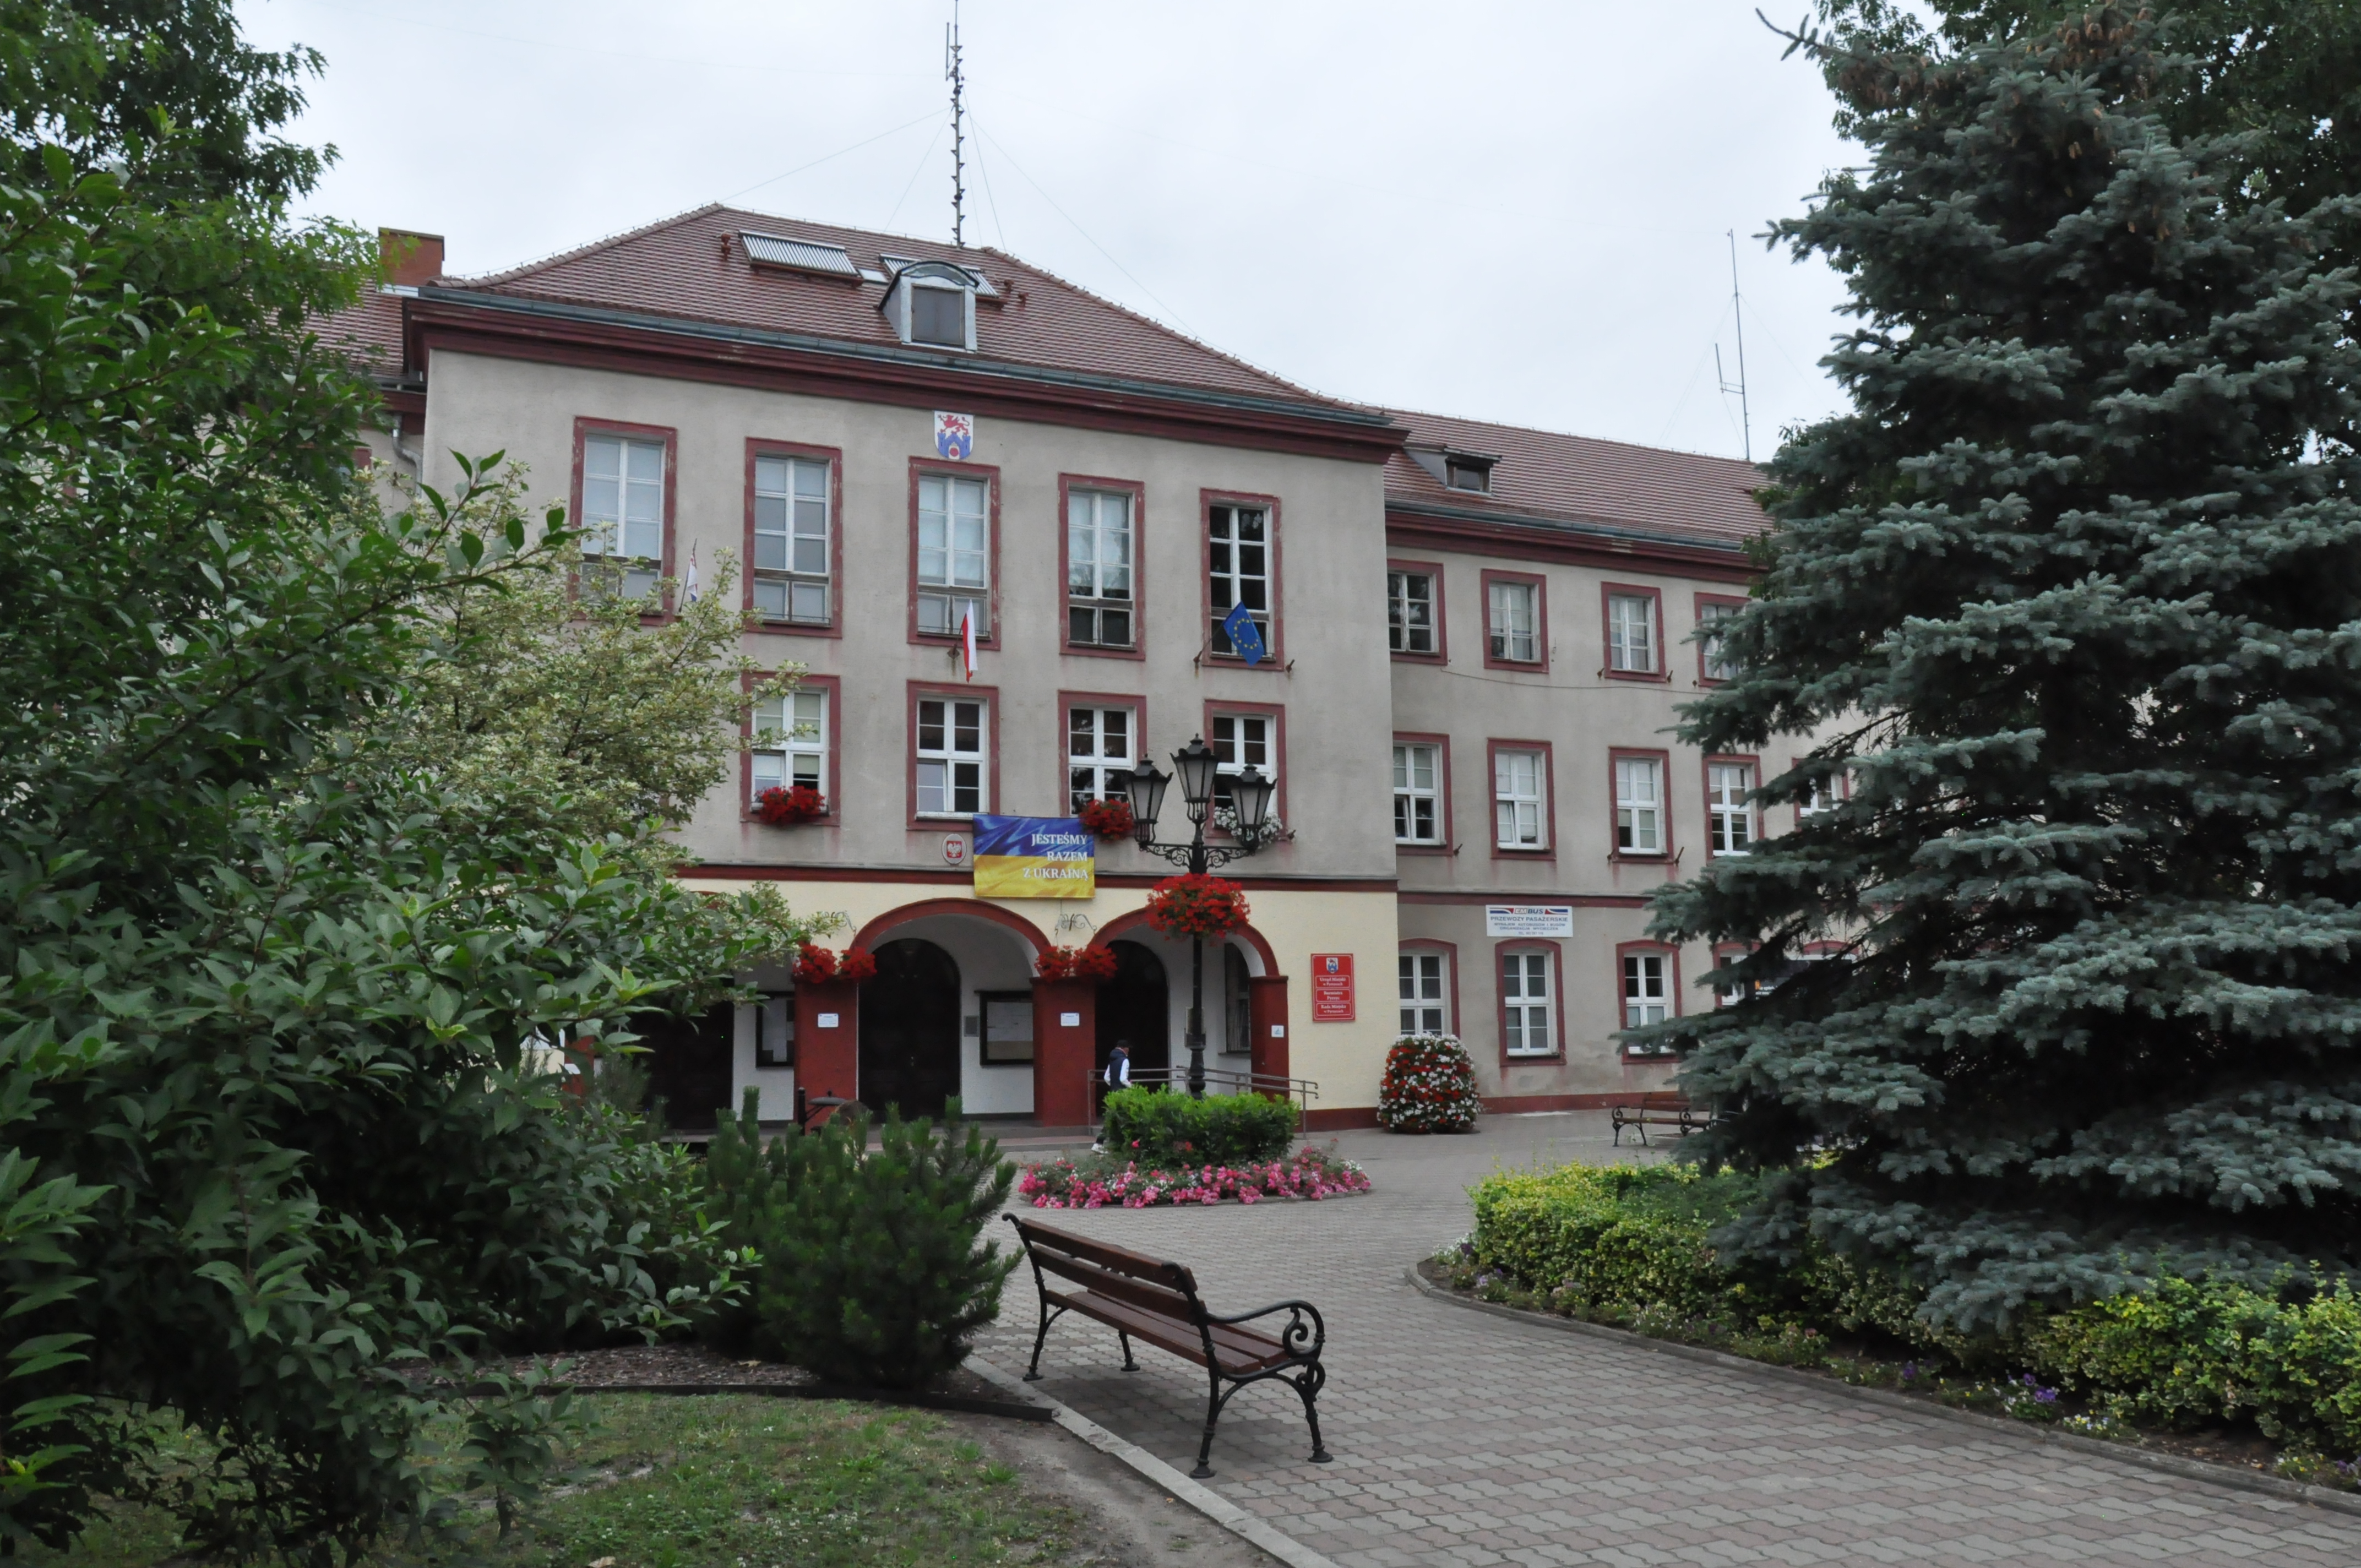 You are currently viewing Prywatny parter Ratusza – DOKUMENTY cz – 2